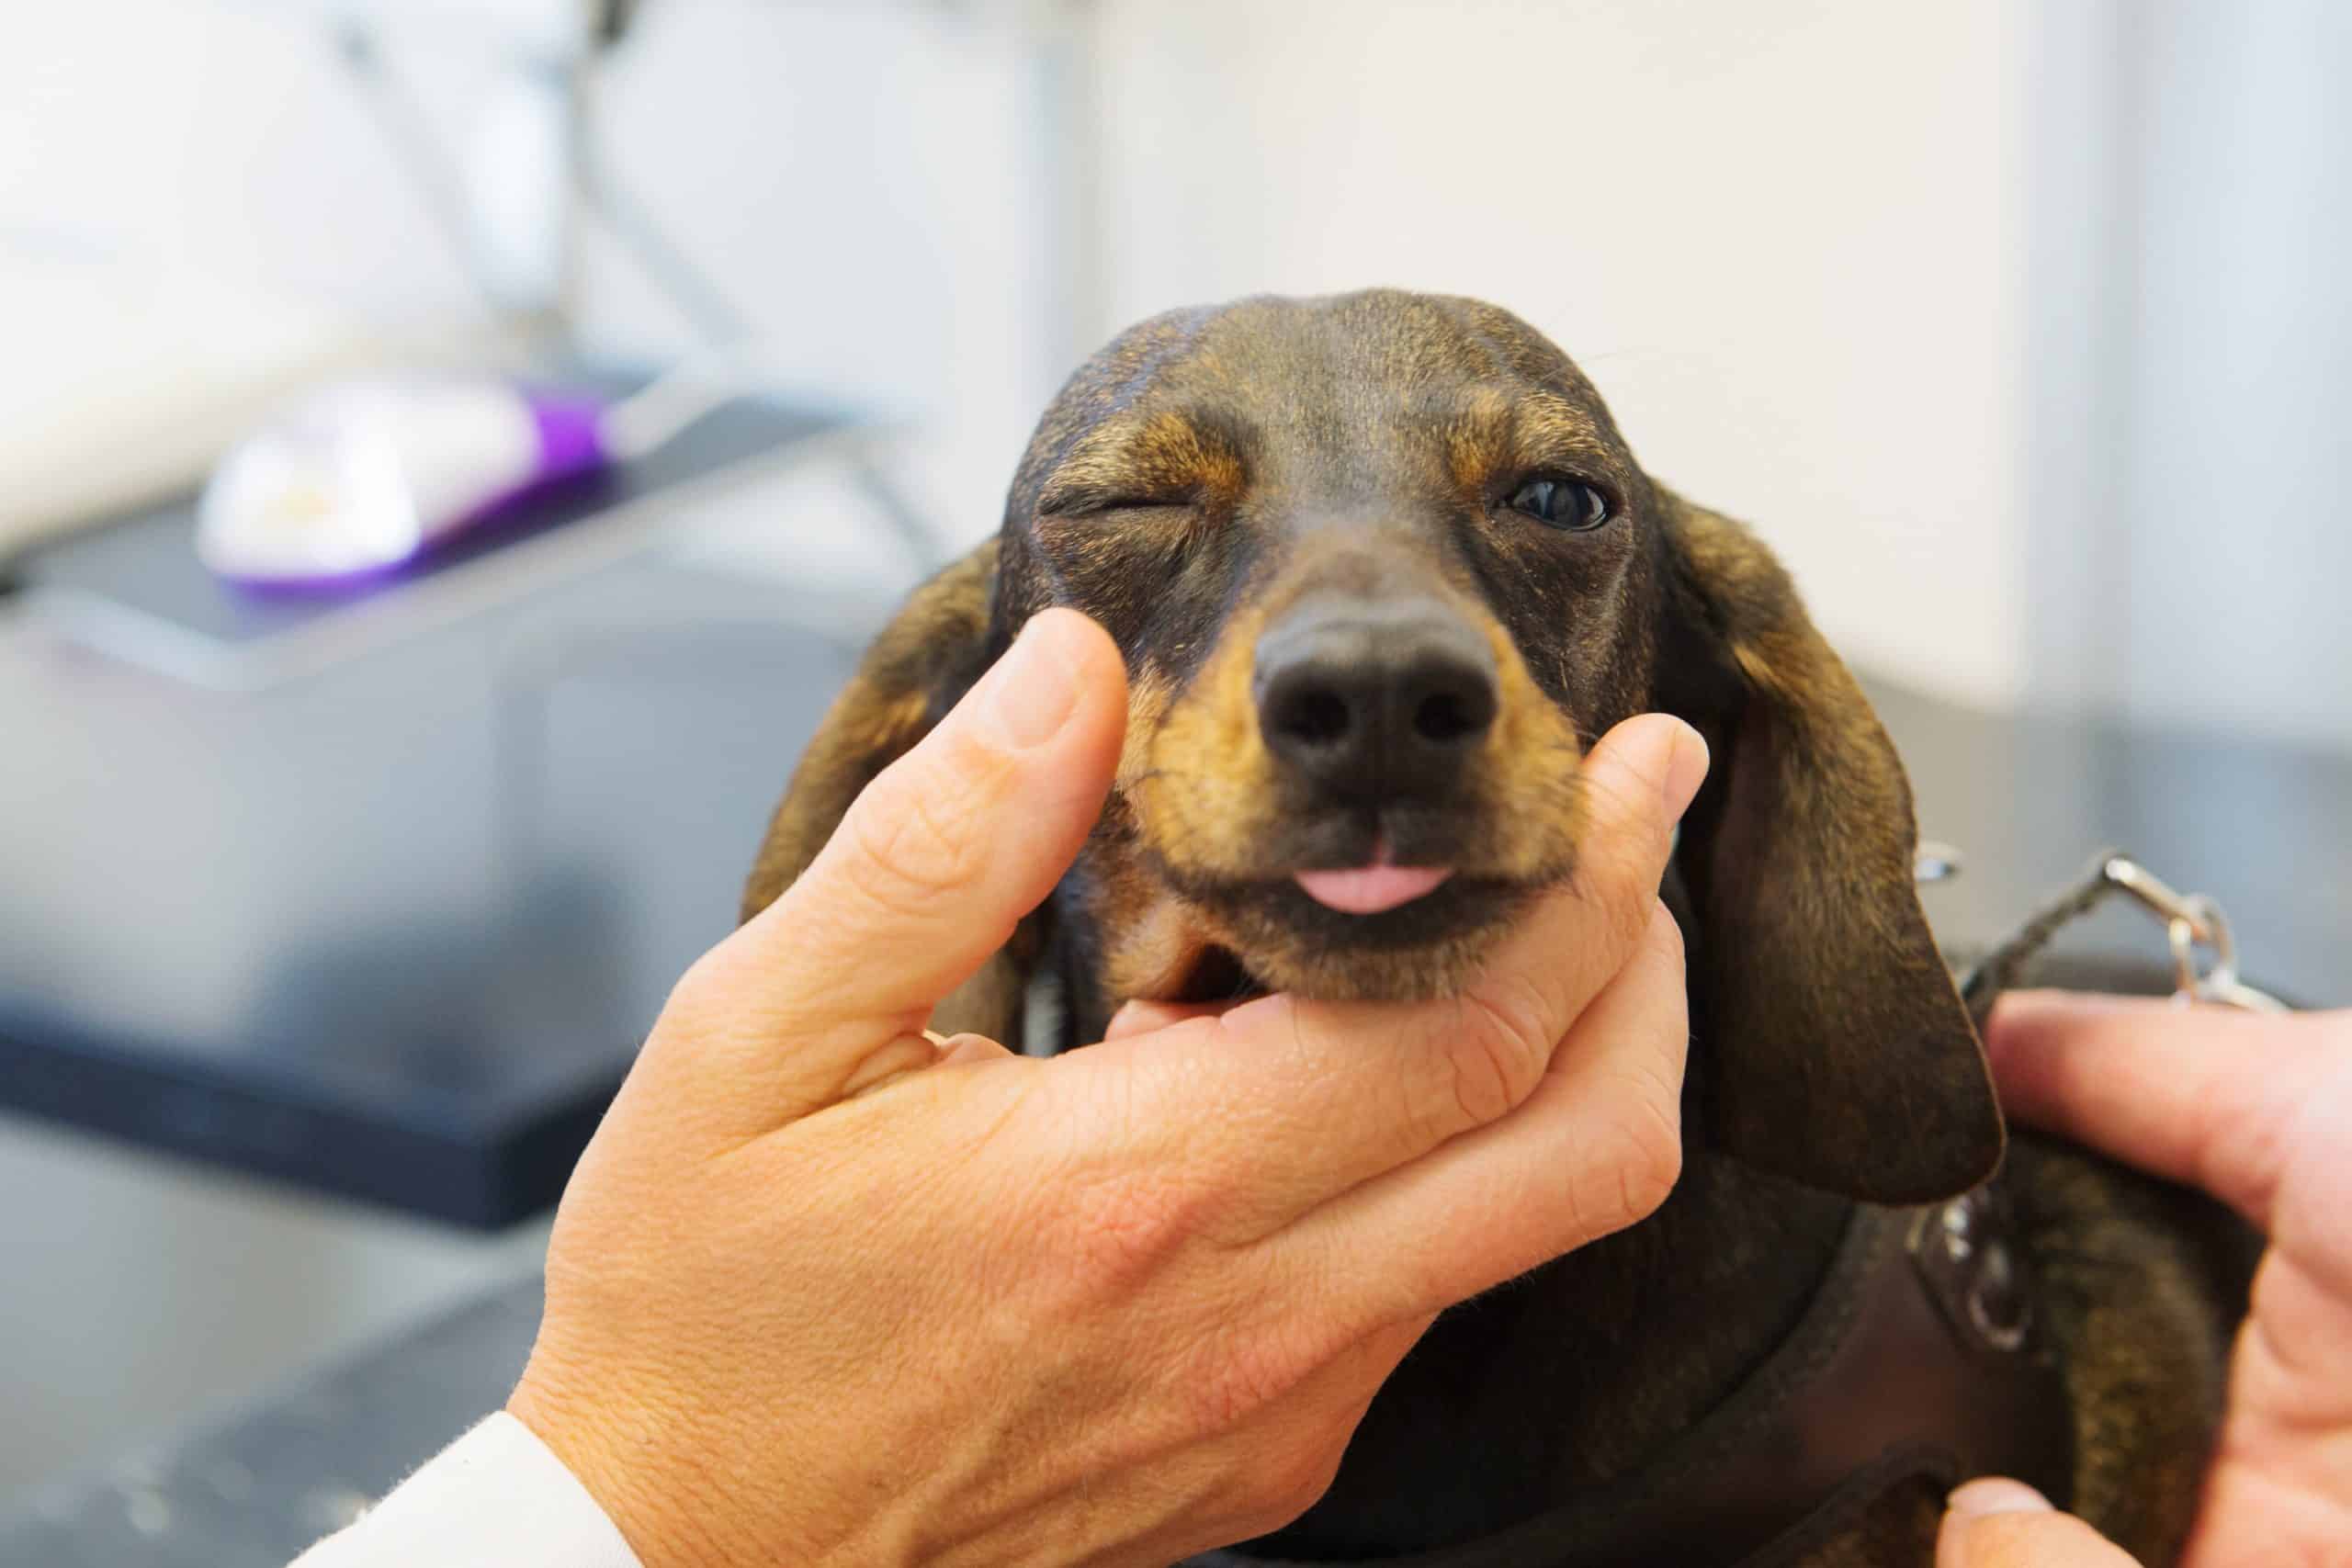 Vet examines Dachshund with a swollen eyelid.